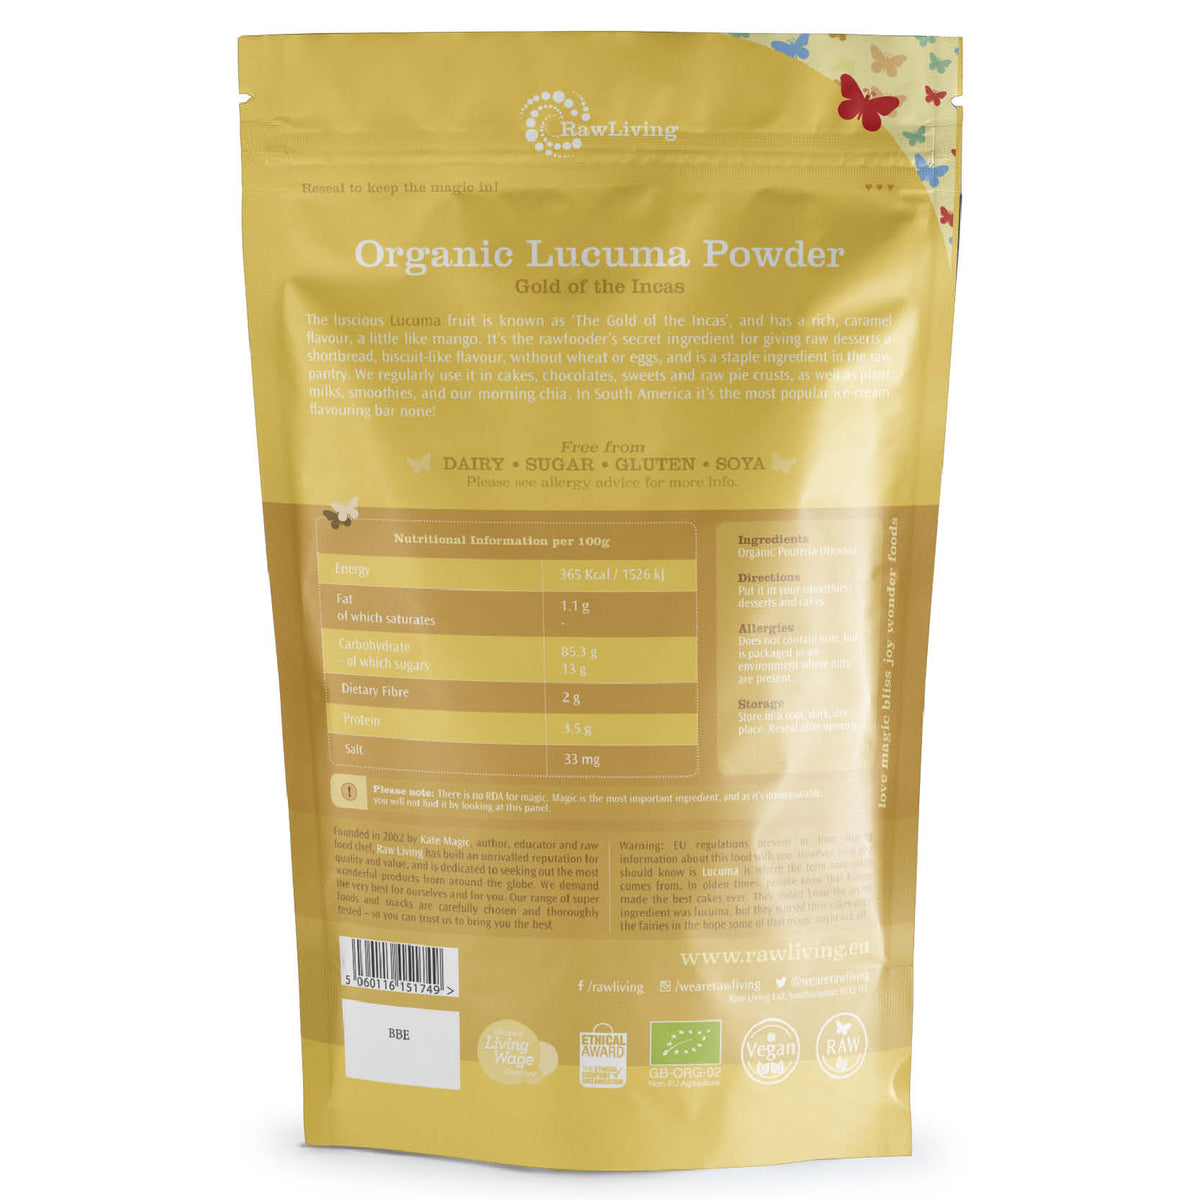 Organic Lucuma Powder | Raw Living UK | Raw Foods | Super Foods | Raw Living Organic Lucuma Powder is a deliciously creamy Raw Vegan Natural Sweetener. A popular fruit in South America, it is known as &#39;Gold of the Incas&#39;.